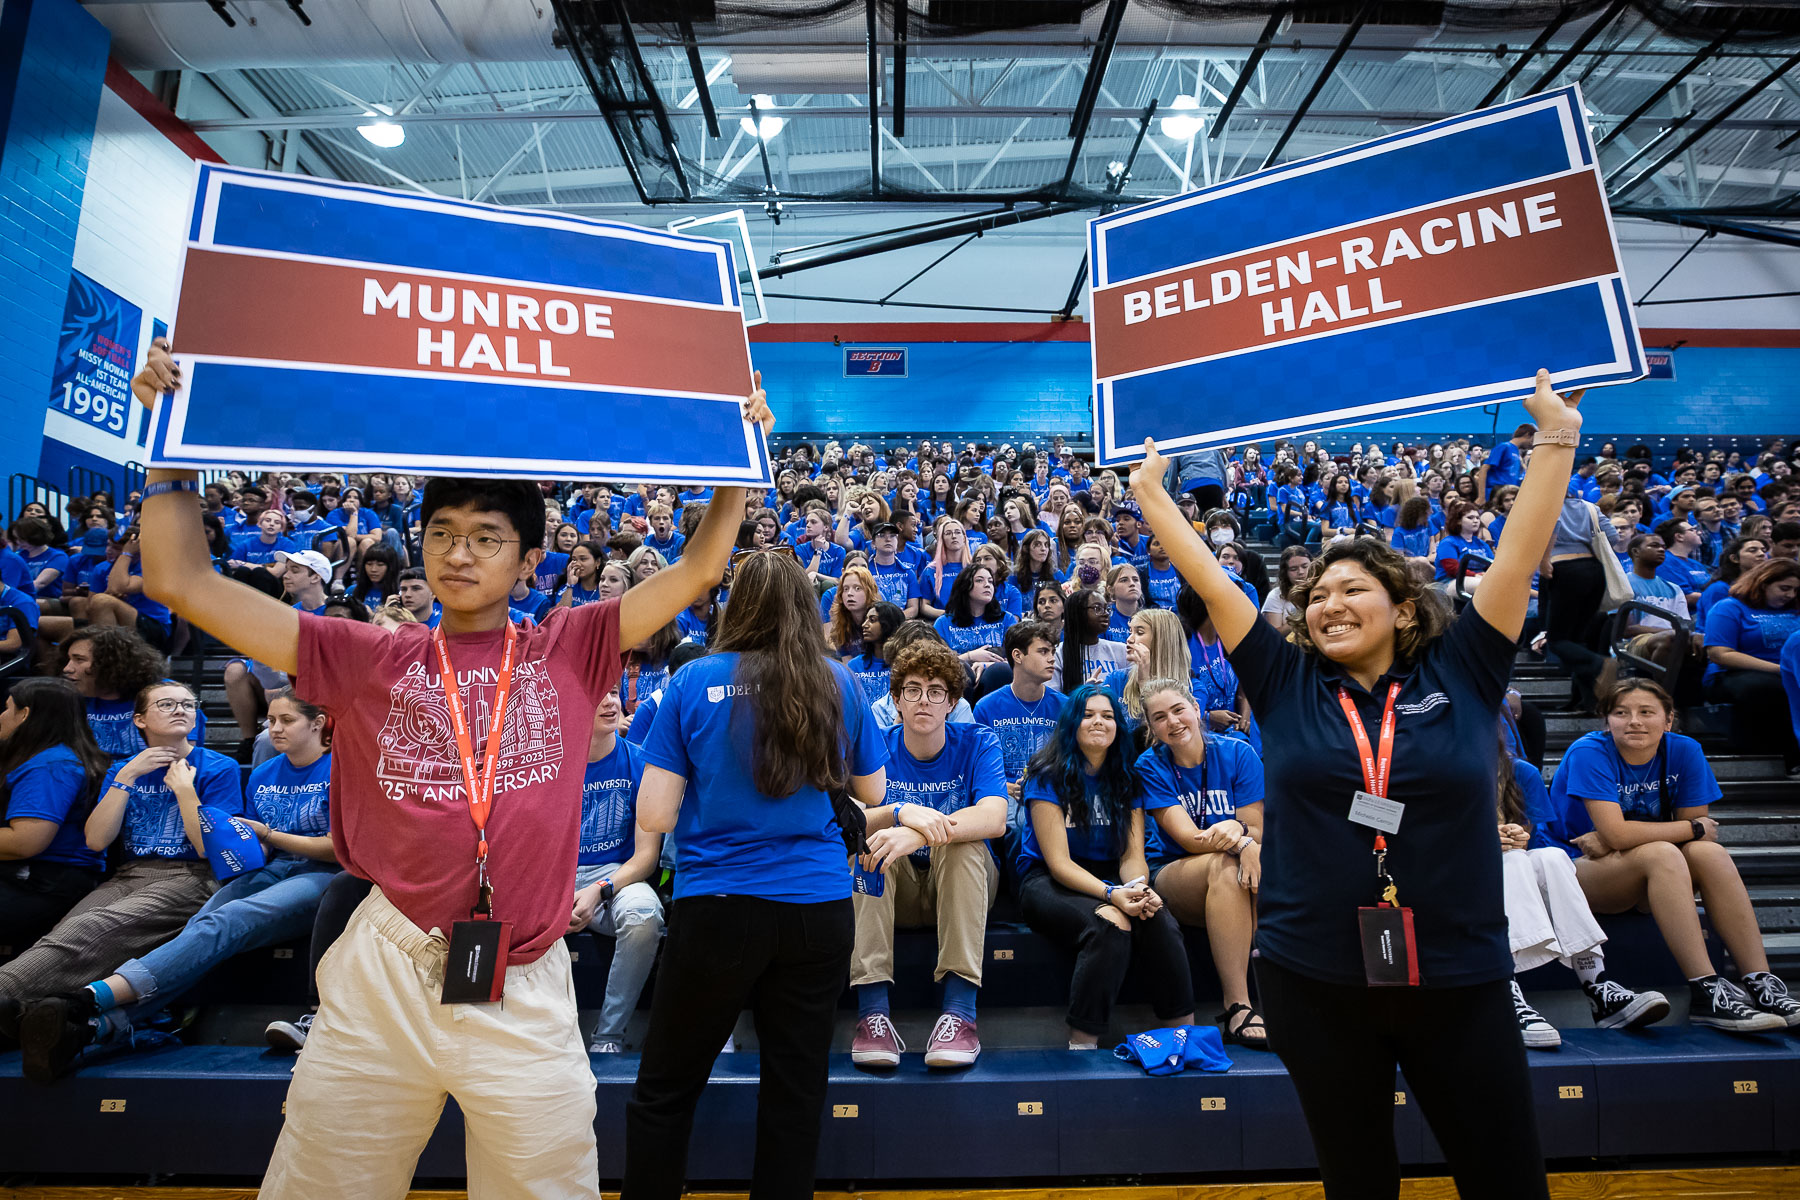 New students assembled in McGrath-Phillips Arena according to their residence halls. New commuter and graduate students were also included. (DePaul University/Jeff Carrion)